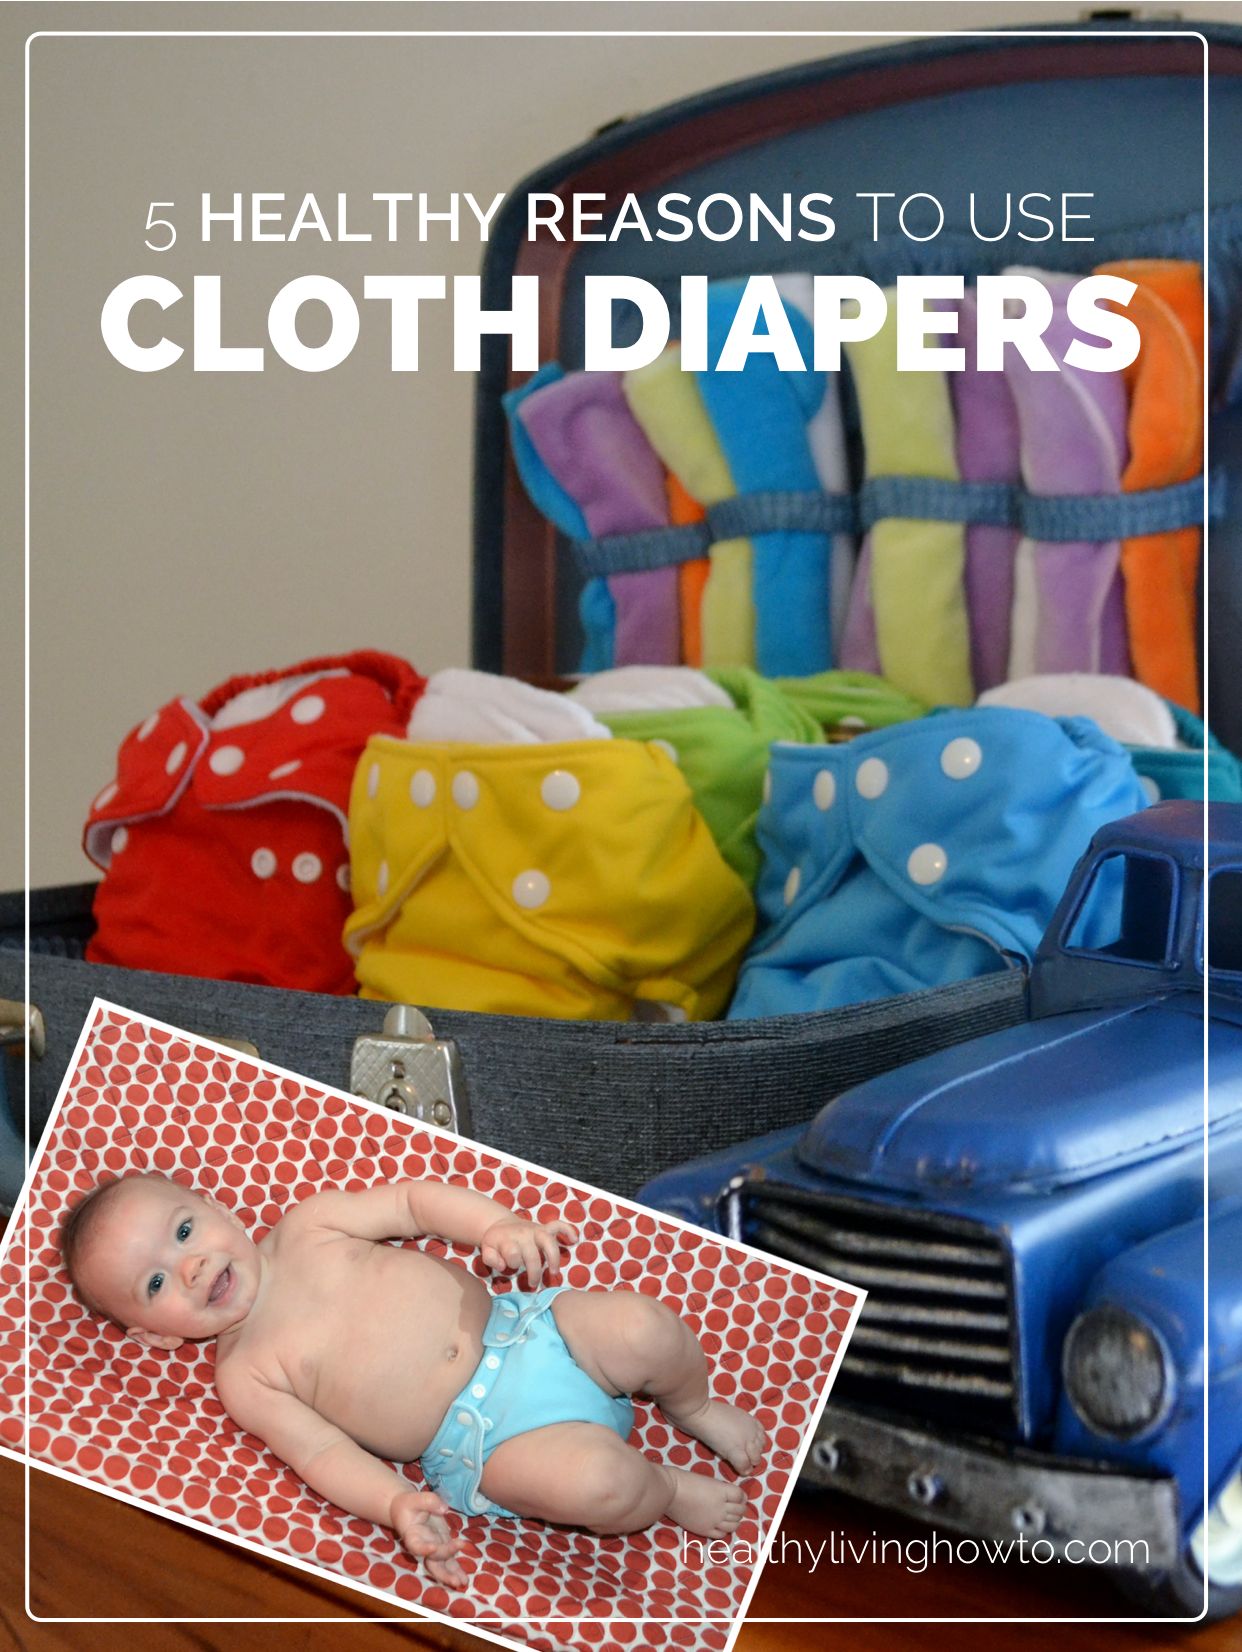 5-healthy-reasons-to-use-cloth-diapers-healthy-living-how-to